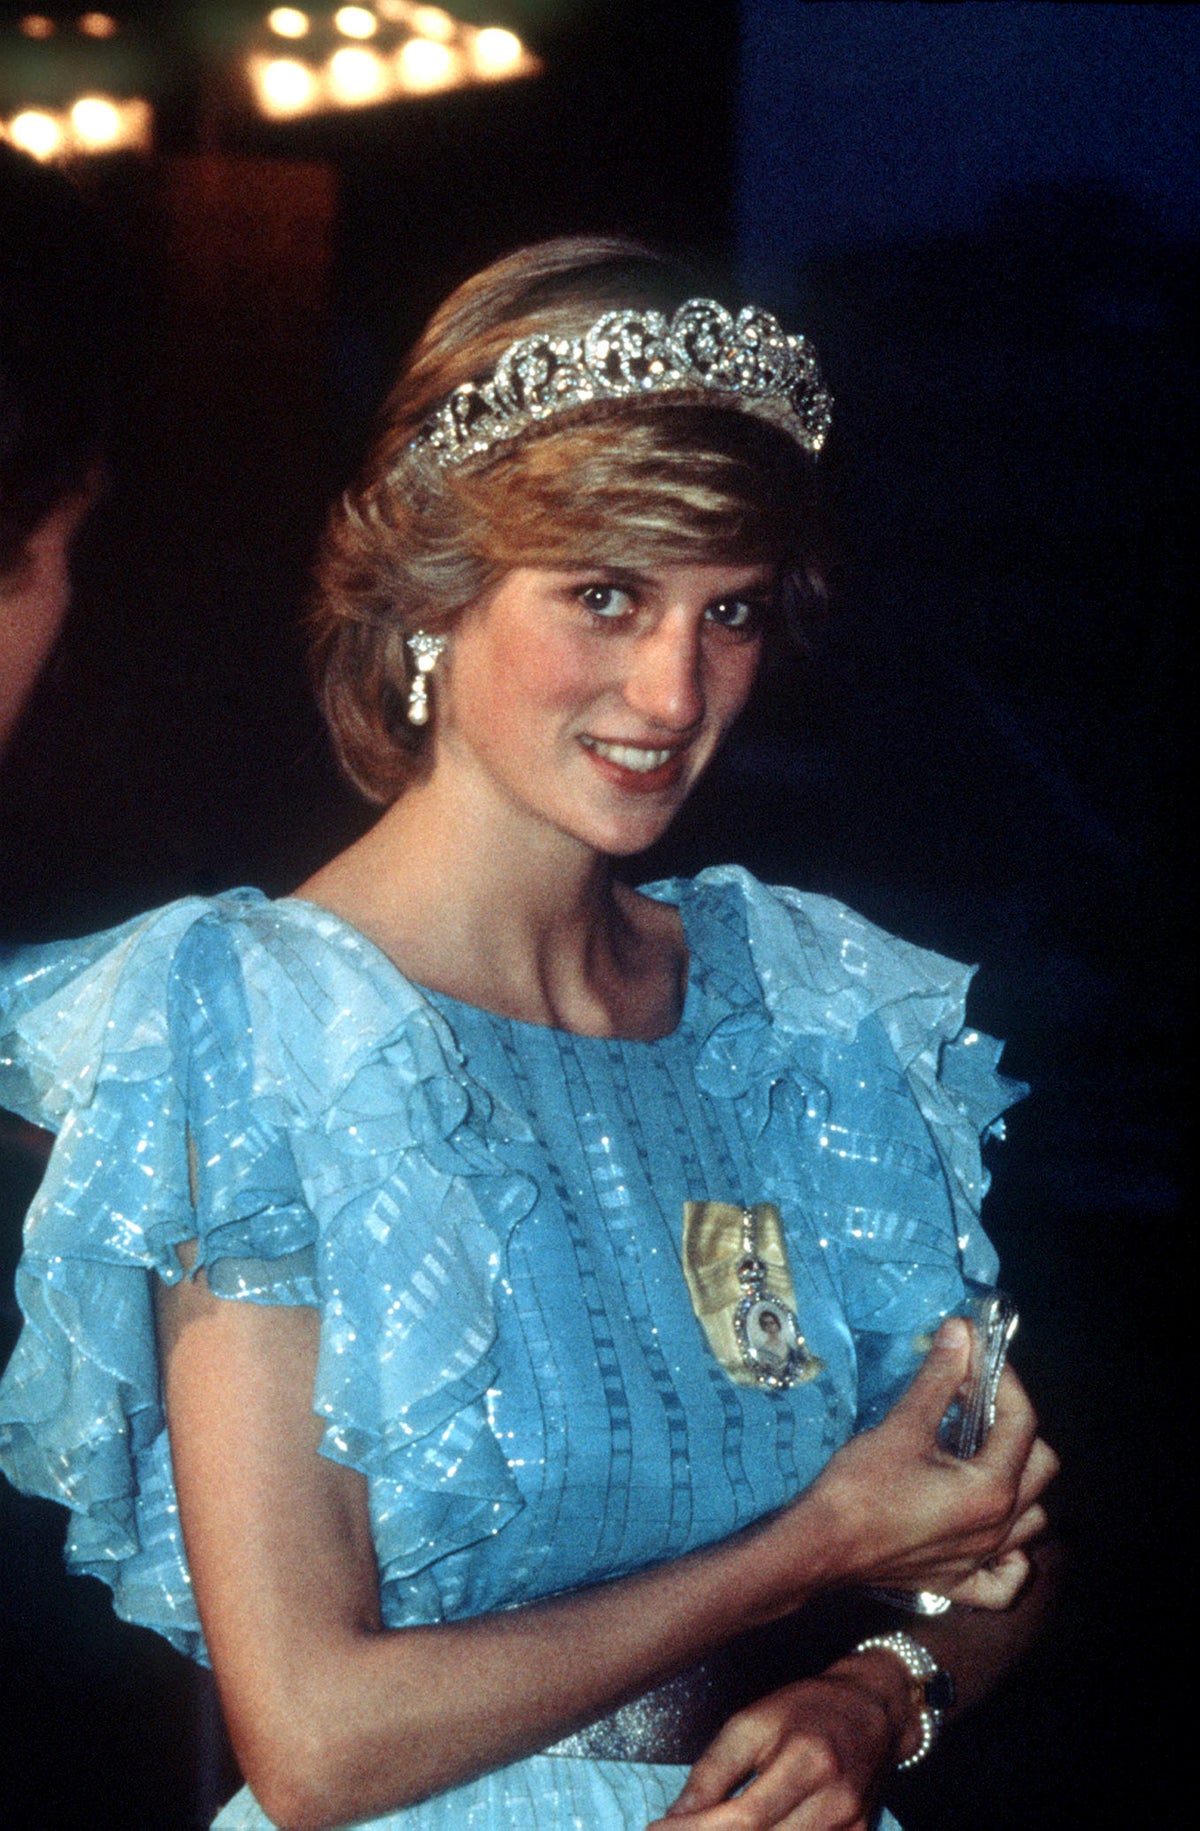 French detectives grapple with fact and fiction of Diana’s death in documentary